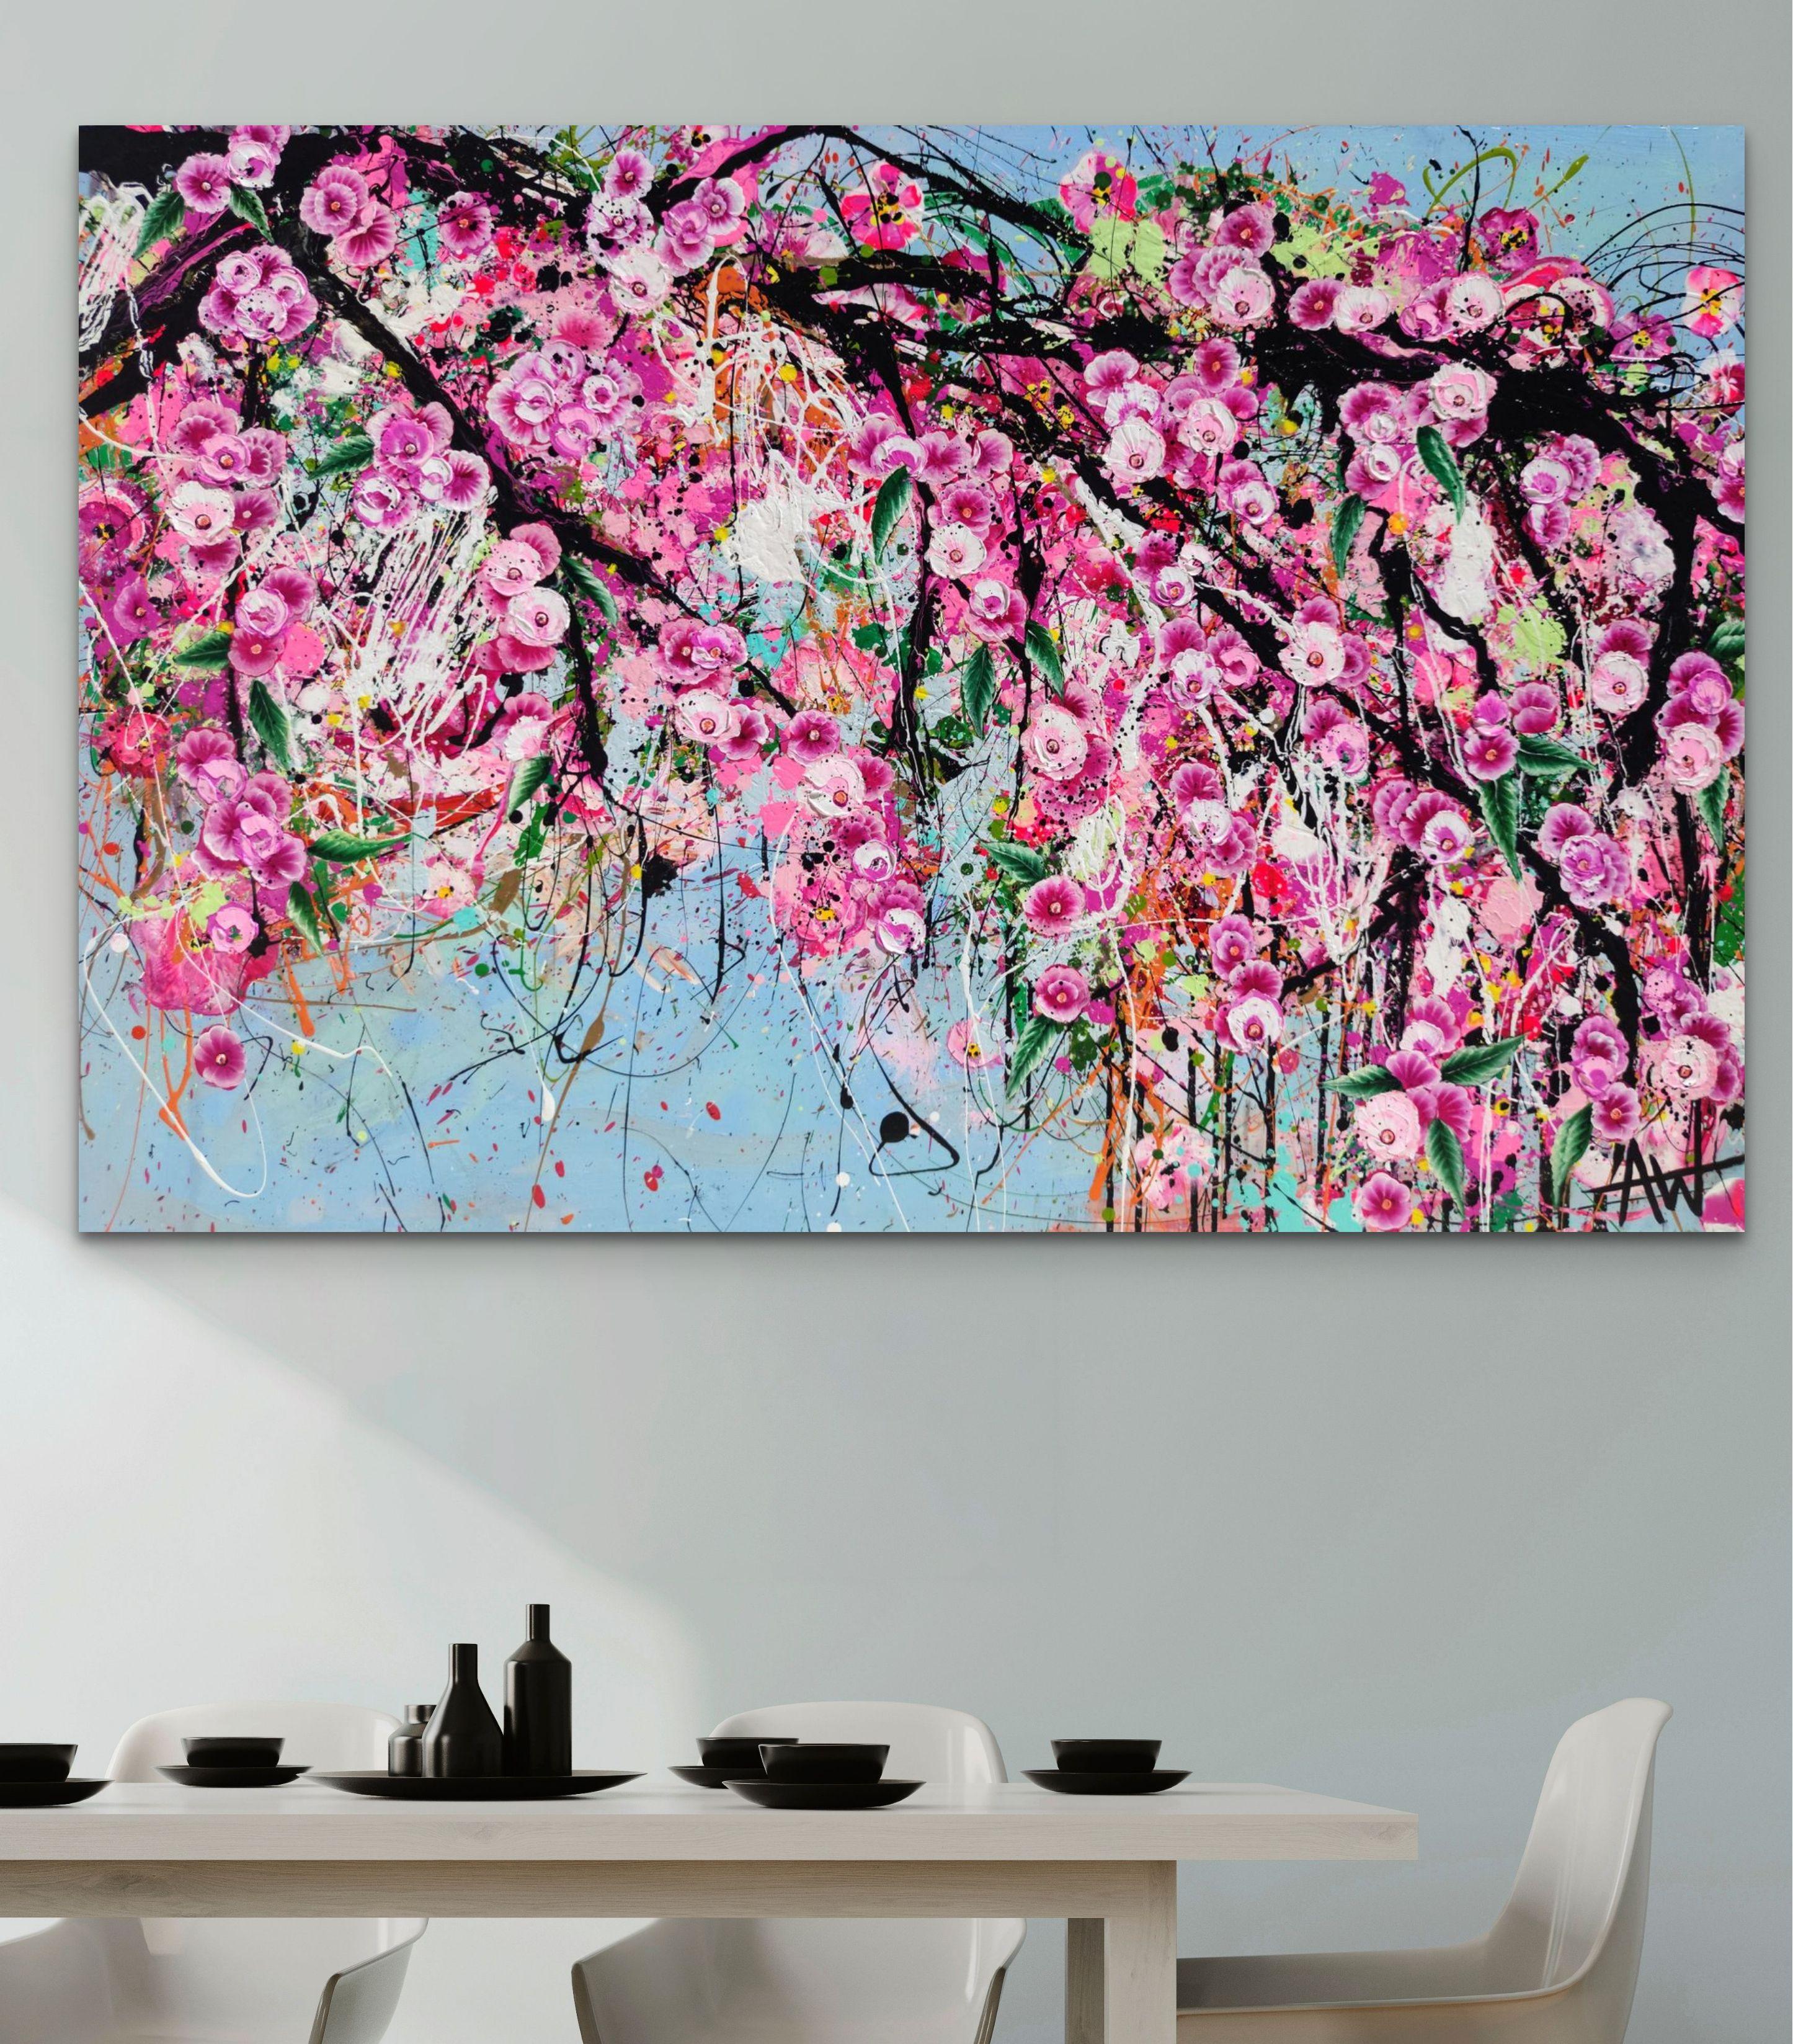 Cherry Crush, oil on canvas, 150 x 100 x 2 cm.  Inspired by my lust for sunshine and flowers, I painted Cherry Crush to bring me closer to Spring and the colour and warmth of the Primavera. Blossom on trees and flowers in bloom, the delight of being